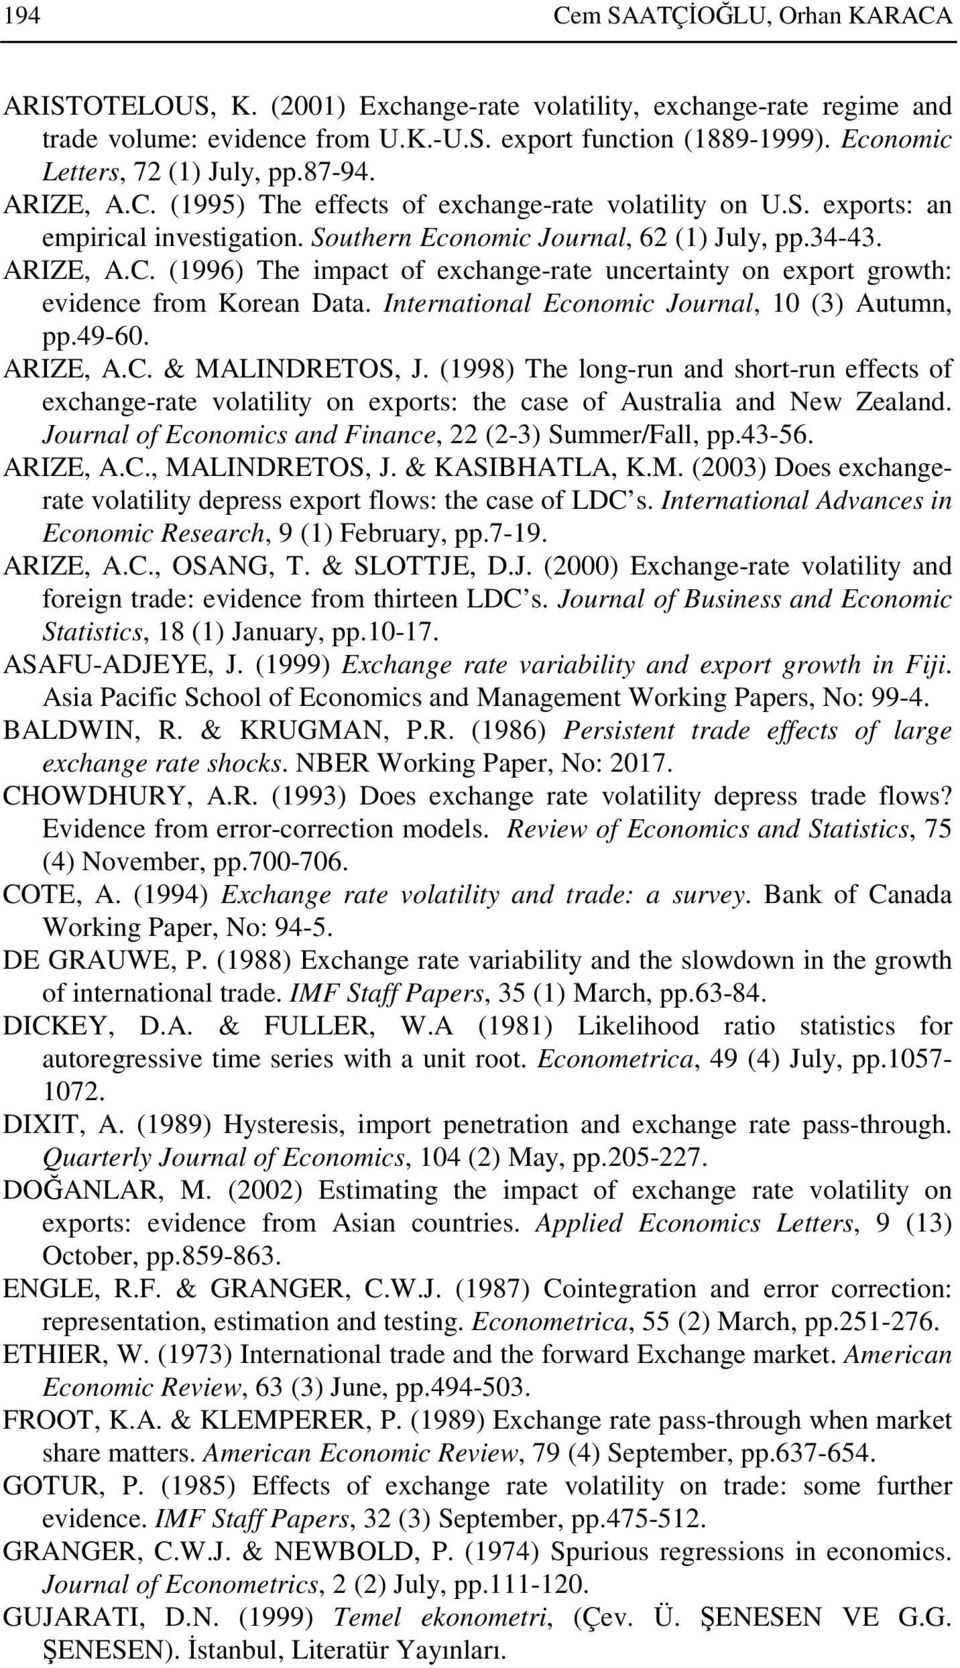 Inernaional Economic Journal, 0 (3) Auumn, pp.49-60. ARIZE, A.C. & MALINDRETOS, J. (998) The long-run and shor-run effecs of exchange-rae volailiy on expors: he case of Ausralia and New Zealand.